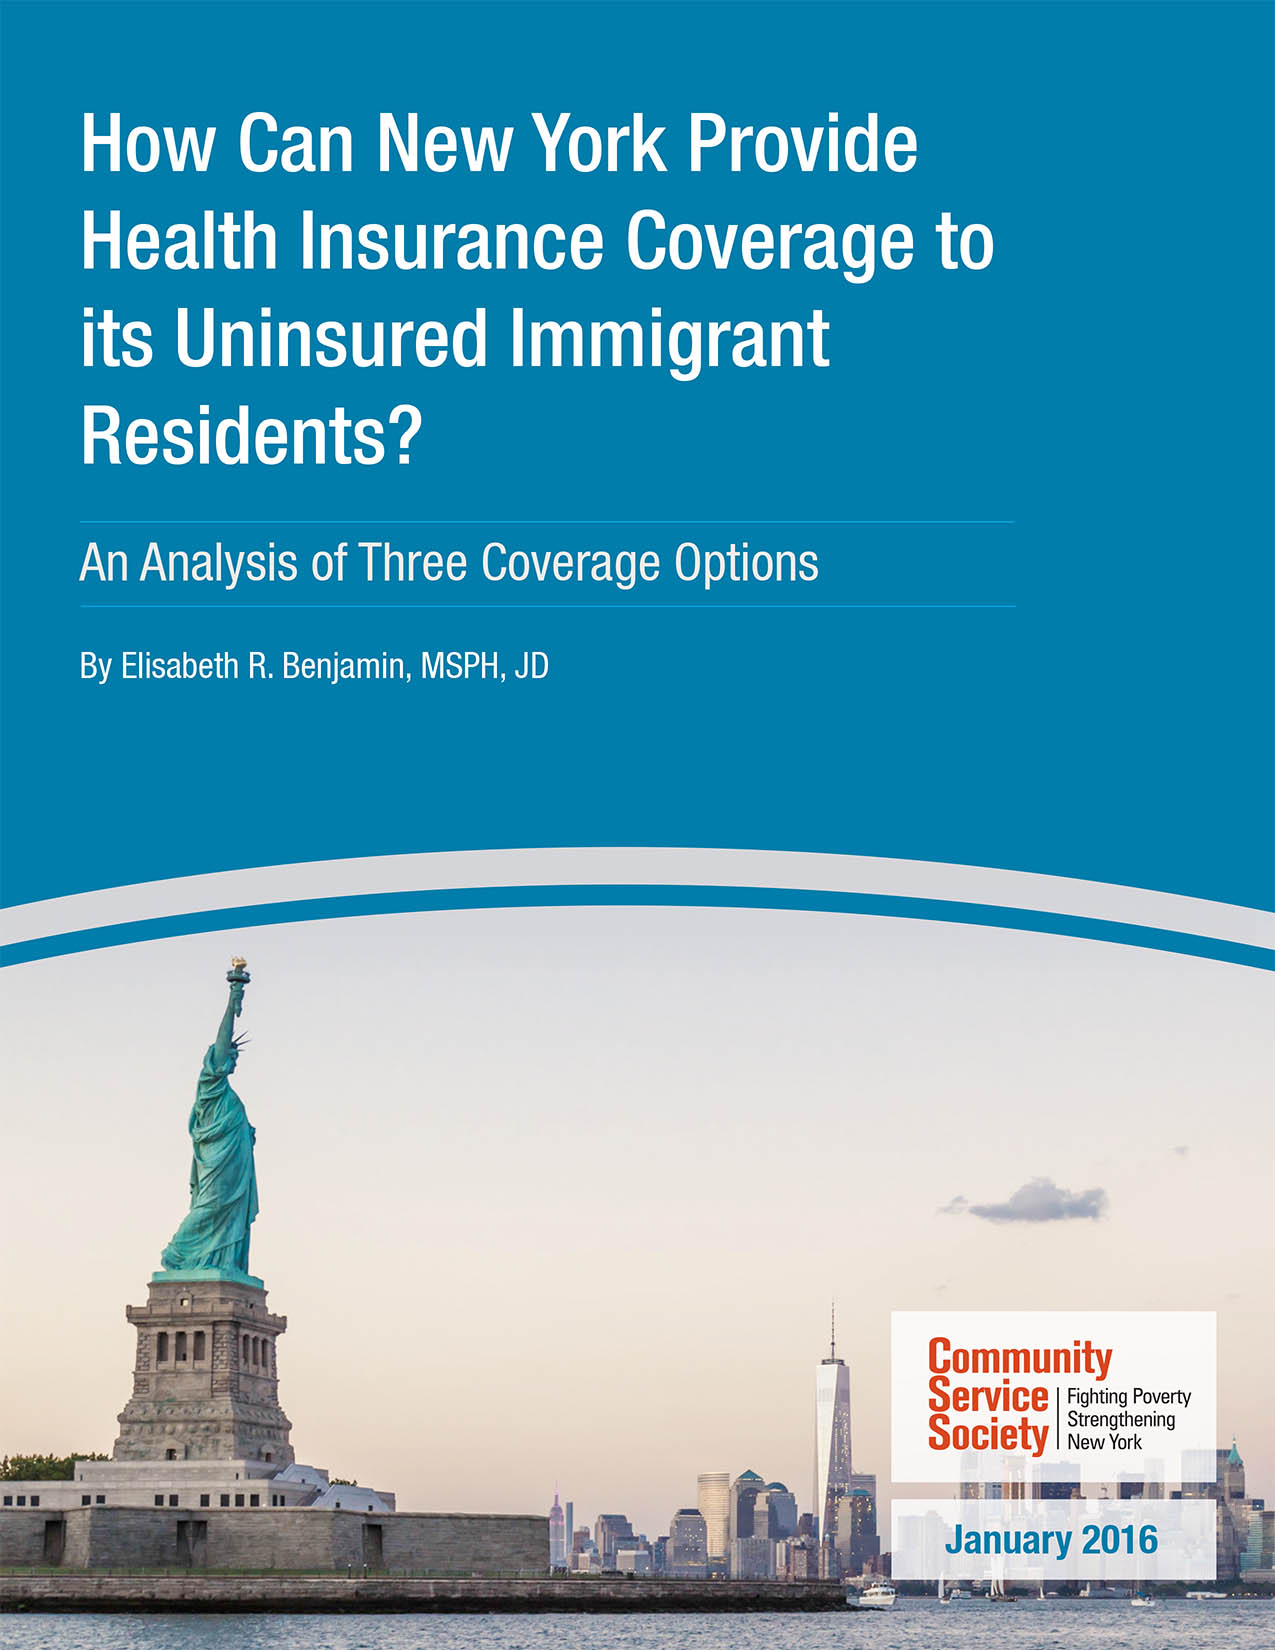 How Can New York Provide Health Insurance Coverage to its Uninsured Immigrant Residents? An Analysis of Three Coverage Options